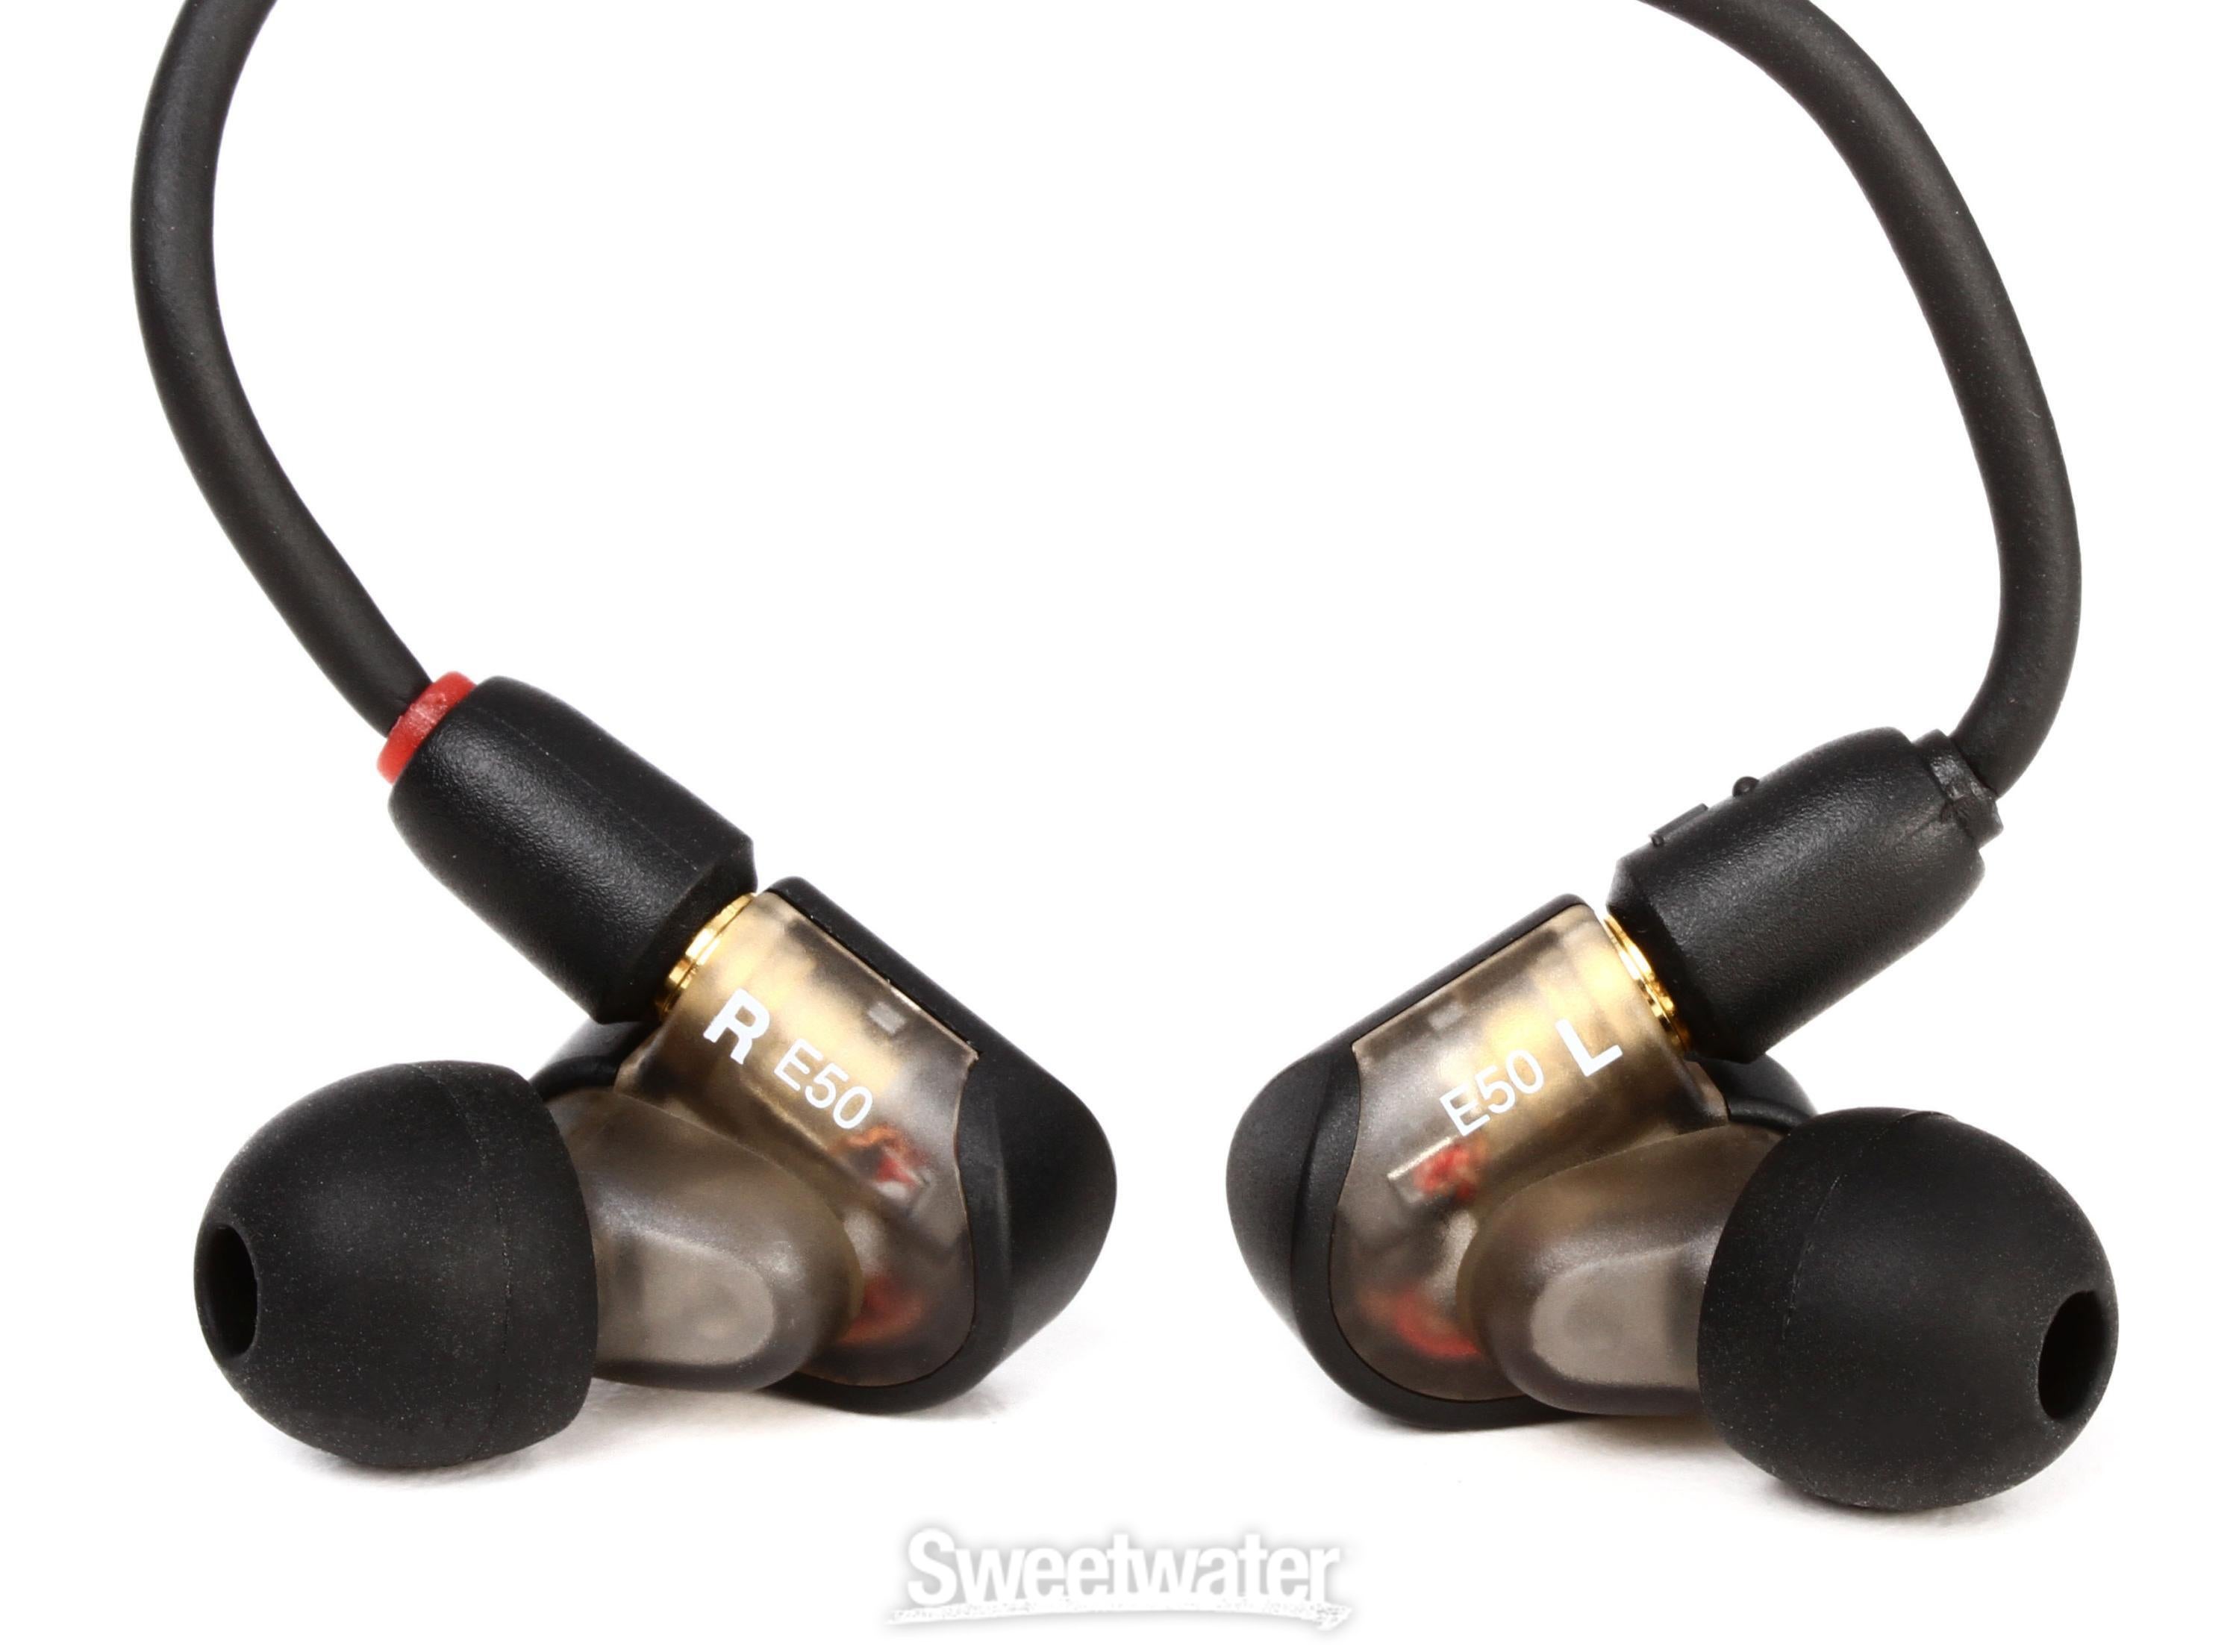 Audio-Technica ATH-E50 Monitor Earphones - Black Reviews | Sweetwater